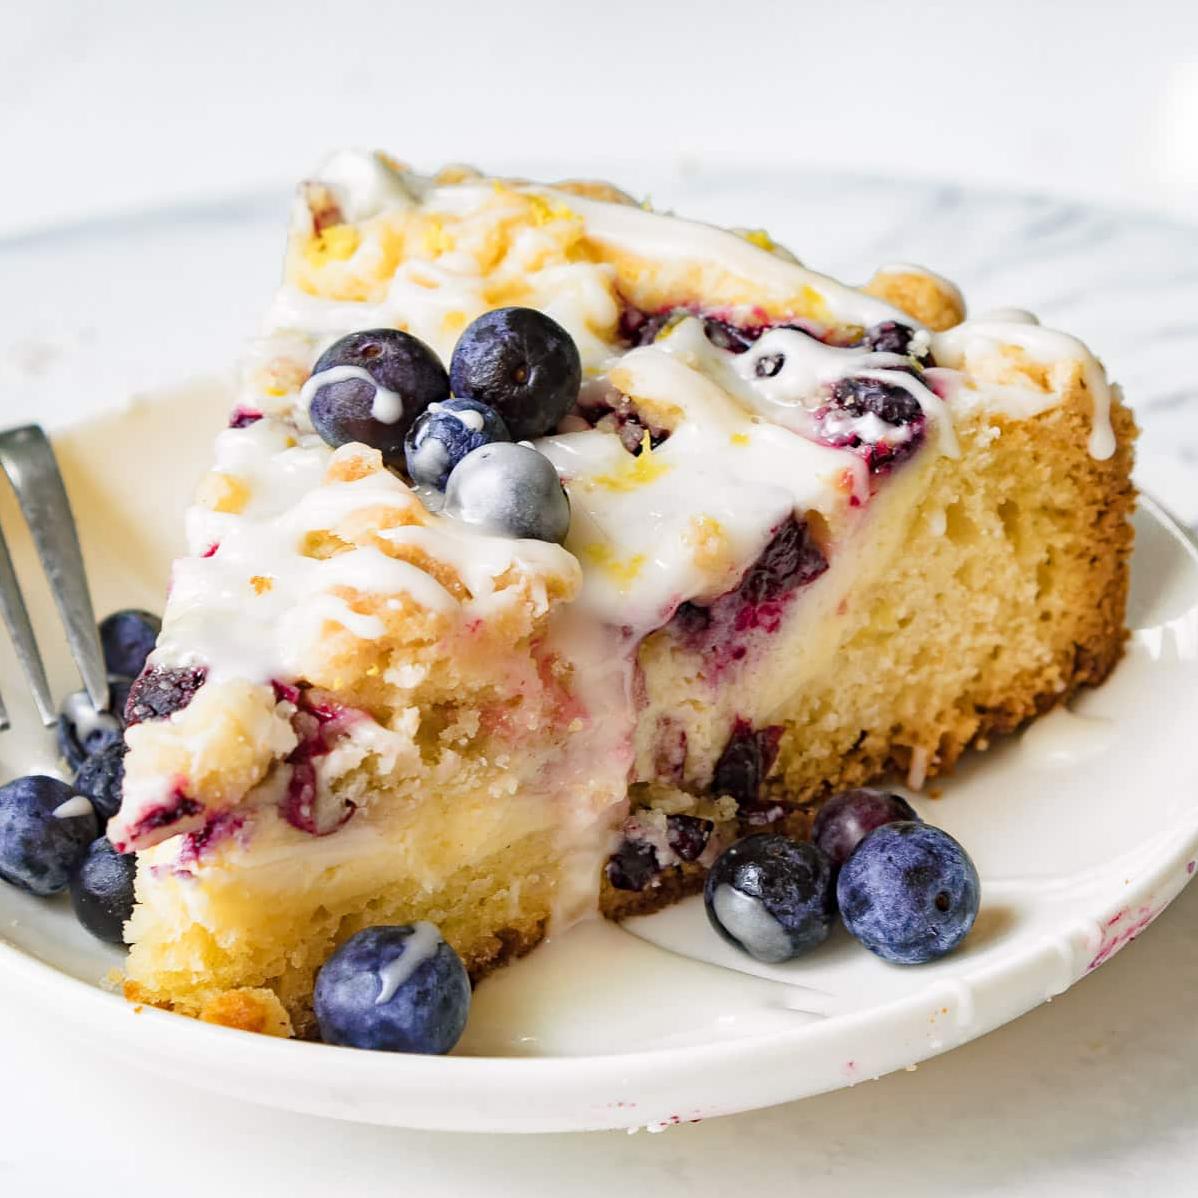  Give your taste buds a treat with this blueberry cheese coffee cake